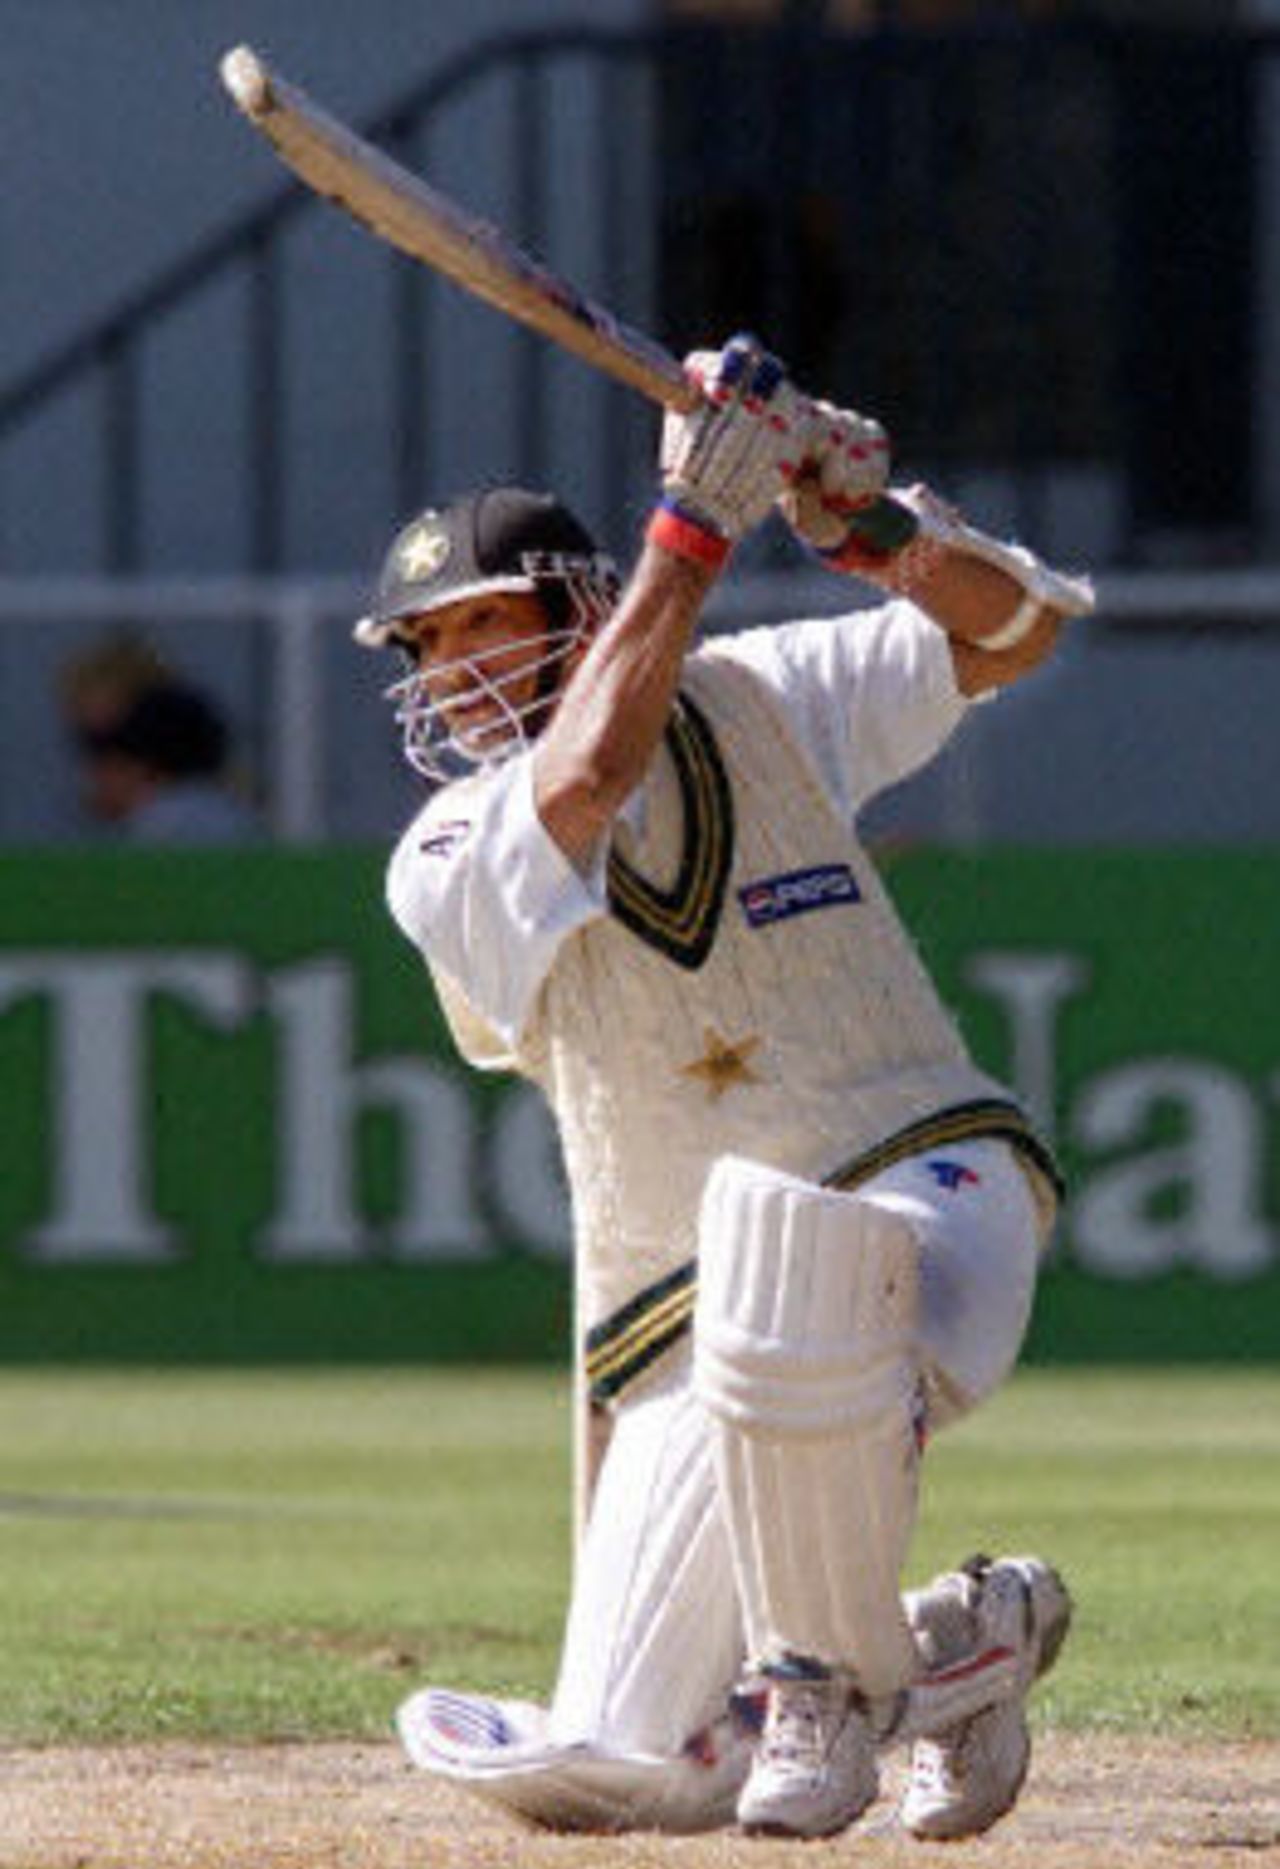 Pakistan batsman Yousuf Youhana crashes a ball through the covers on the way to scoring a double century, day 4, 2nd Test at Christchurch, 15-19 March 2001.